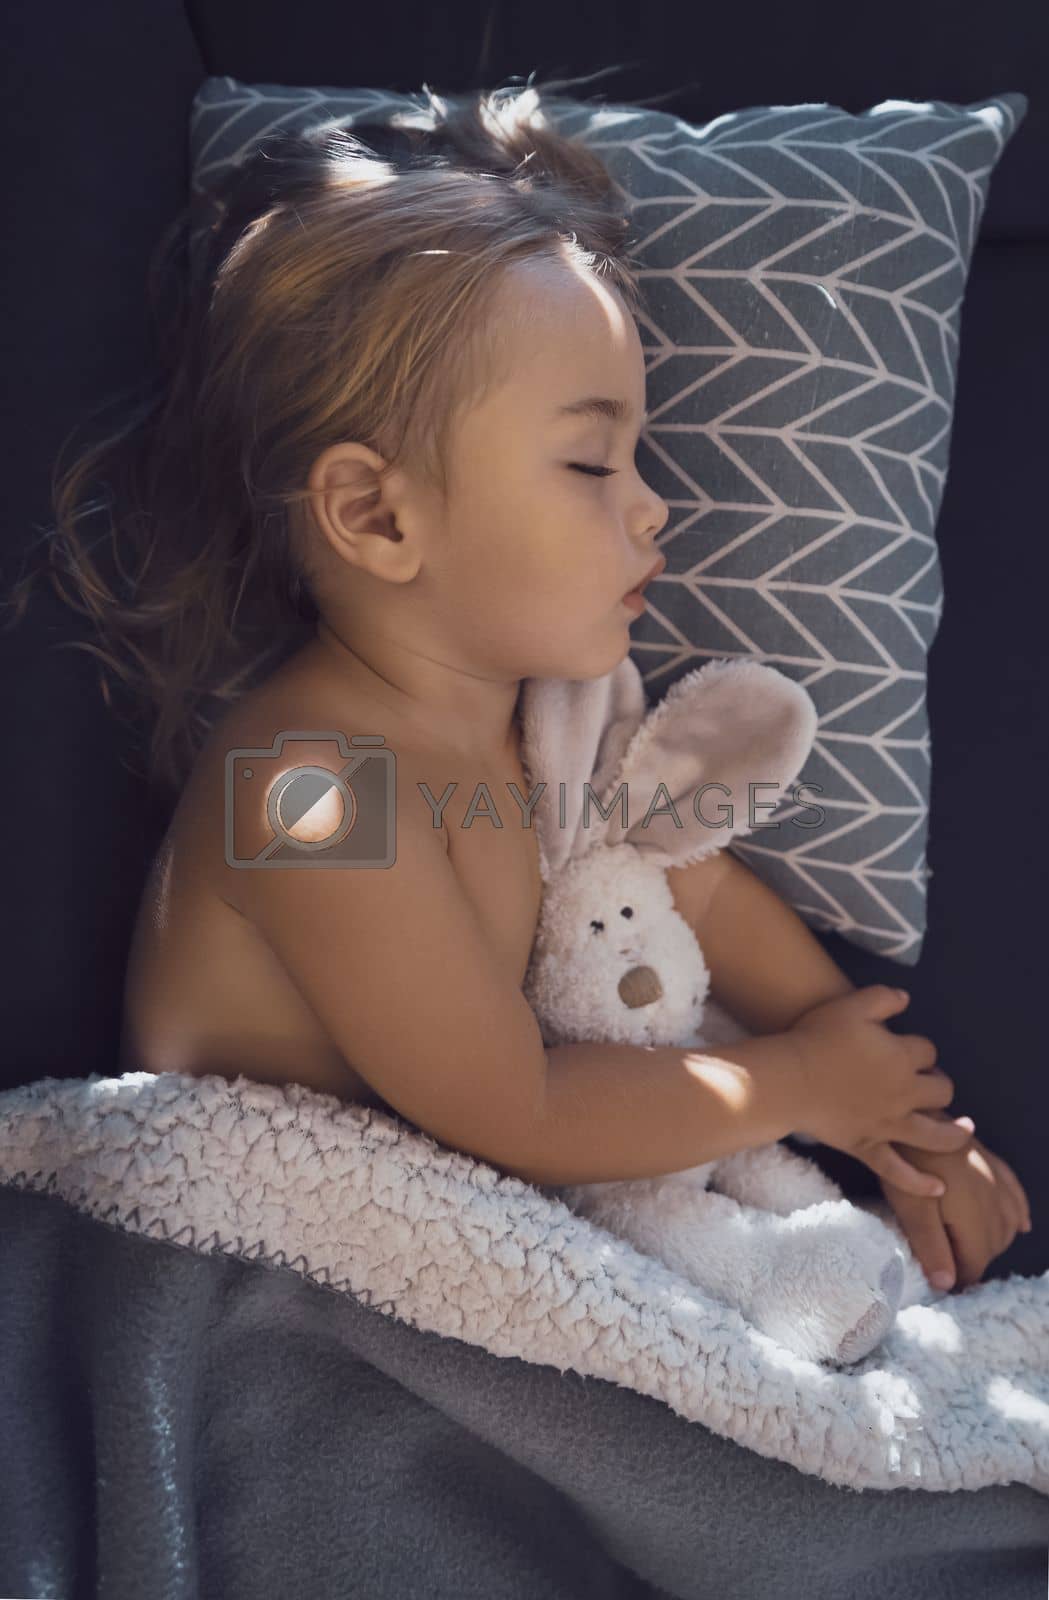 Royalty free image of Beautiful baby sleeping at home by Anna_Omelchenko